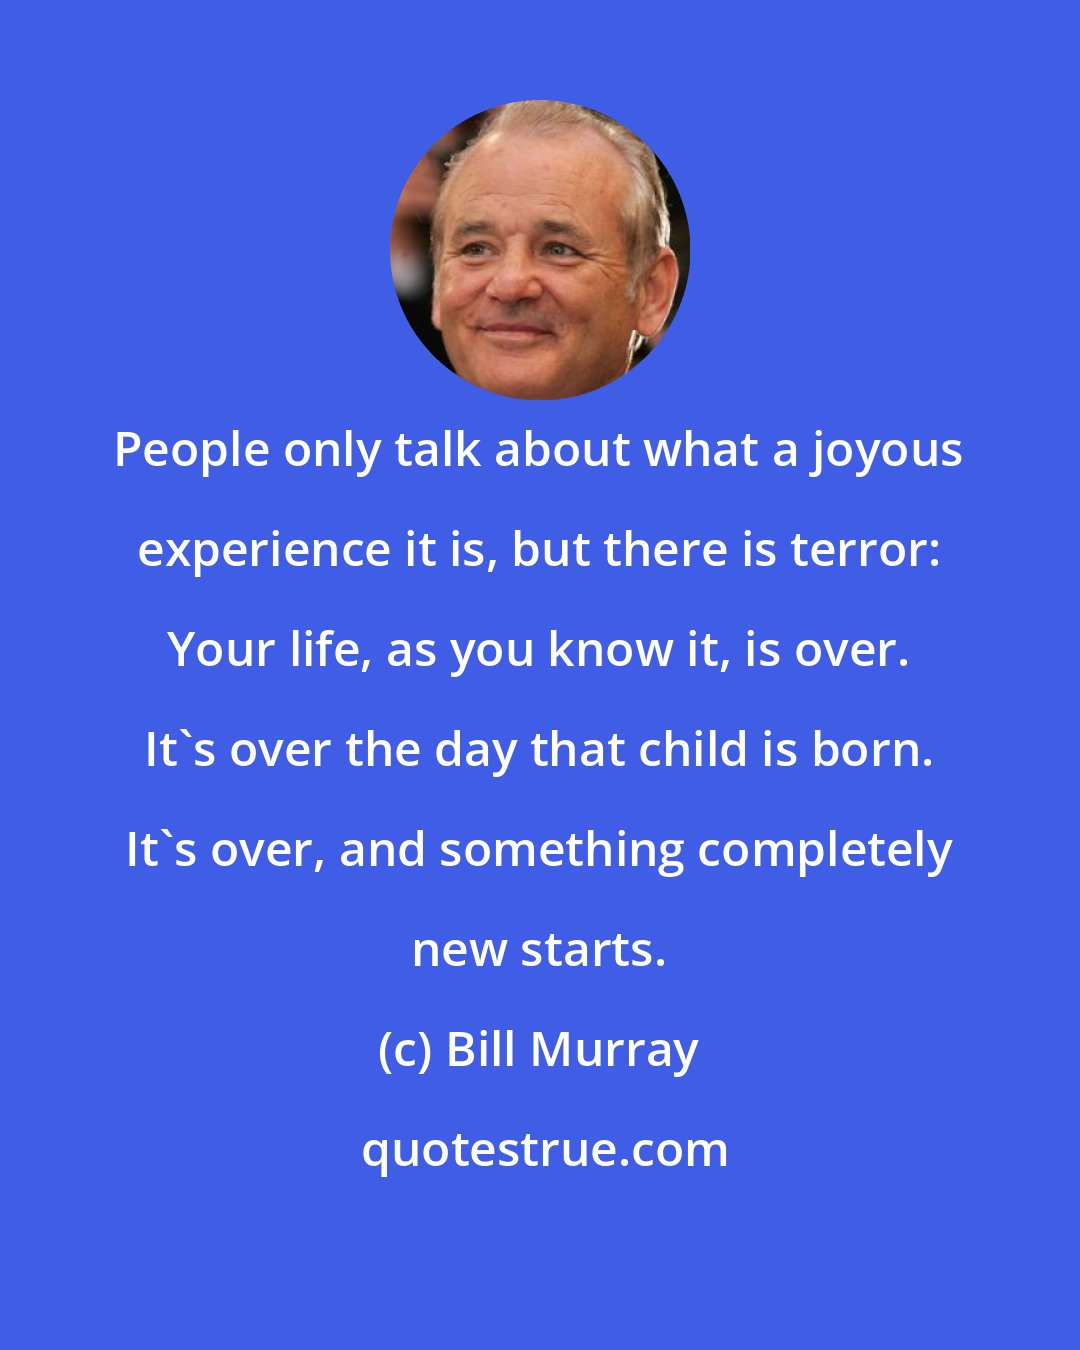 Bill Murray: People only talk about what a joyous experience it is, but there is terror: Your life, as you know it, is over. It's over the day that child is born. It's over, and something completely new starts.